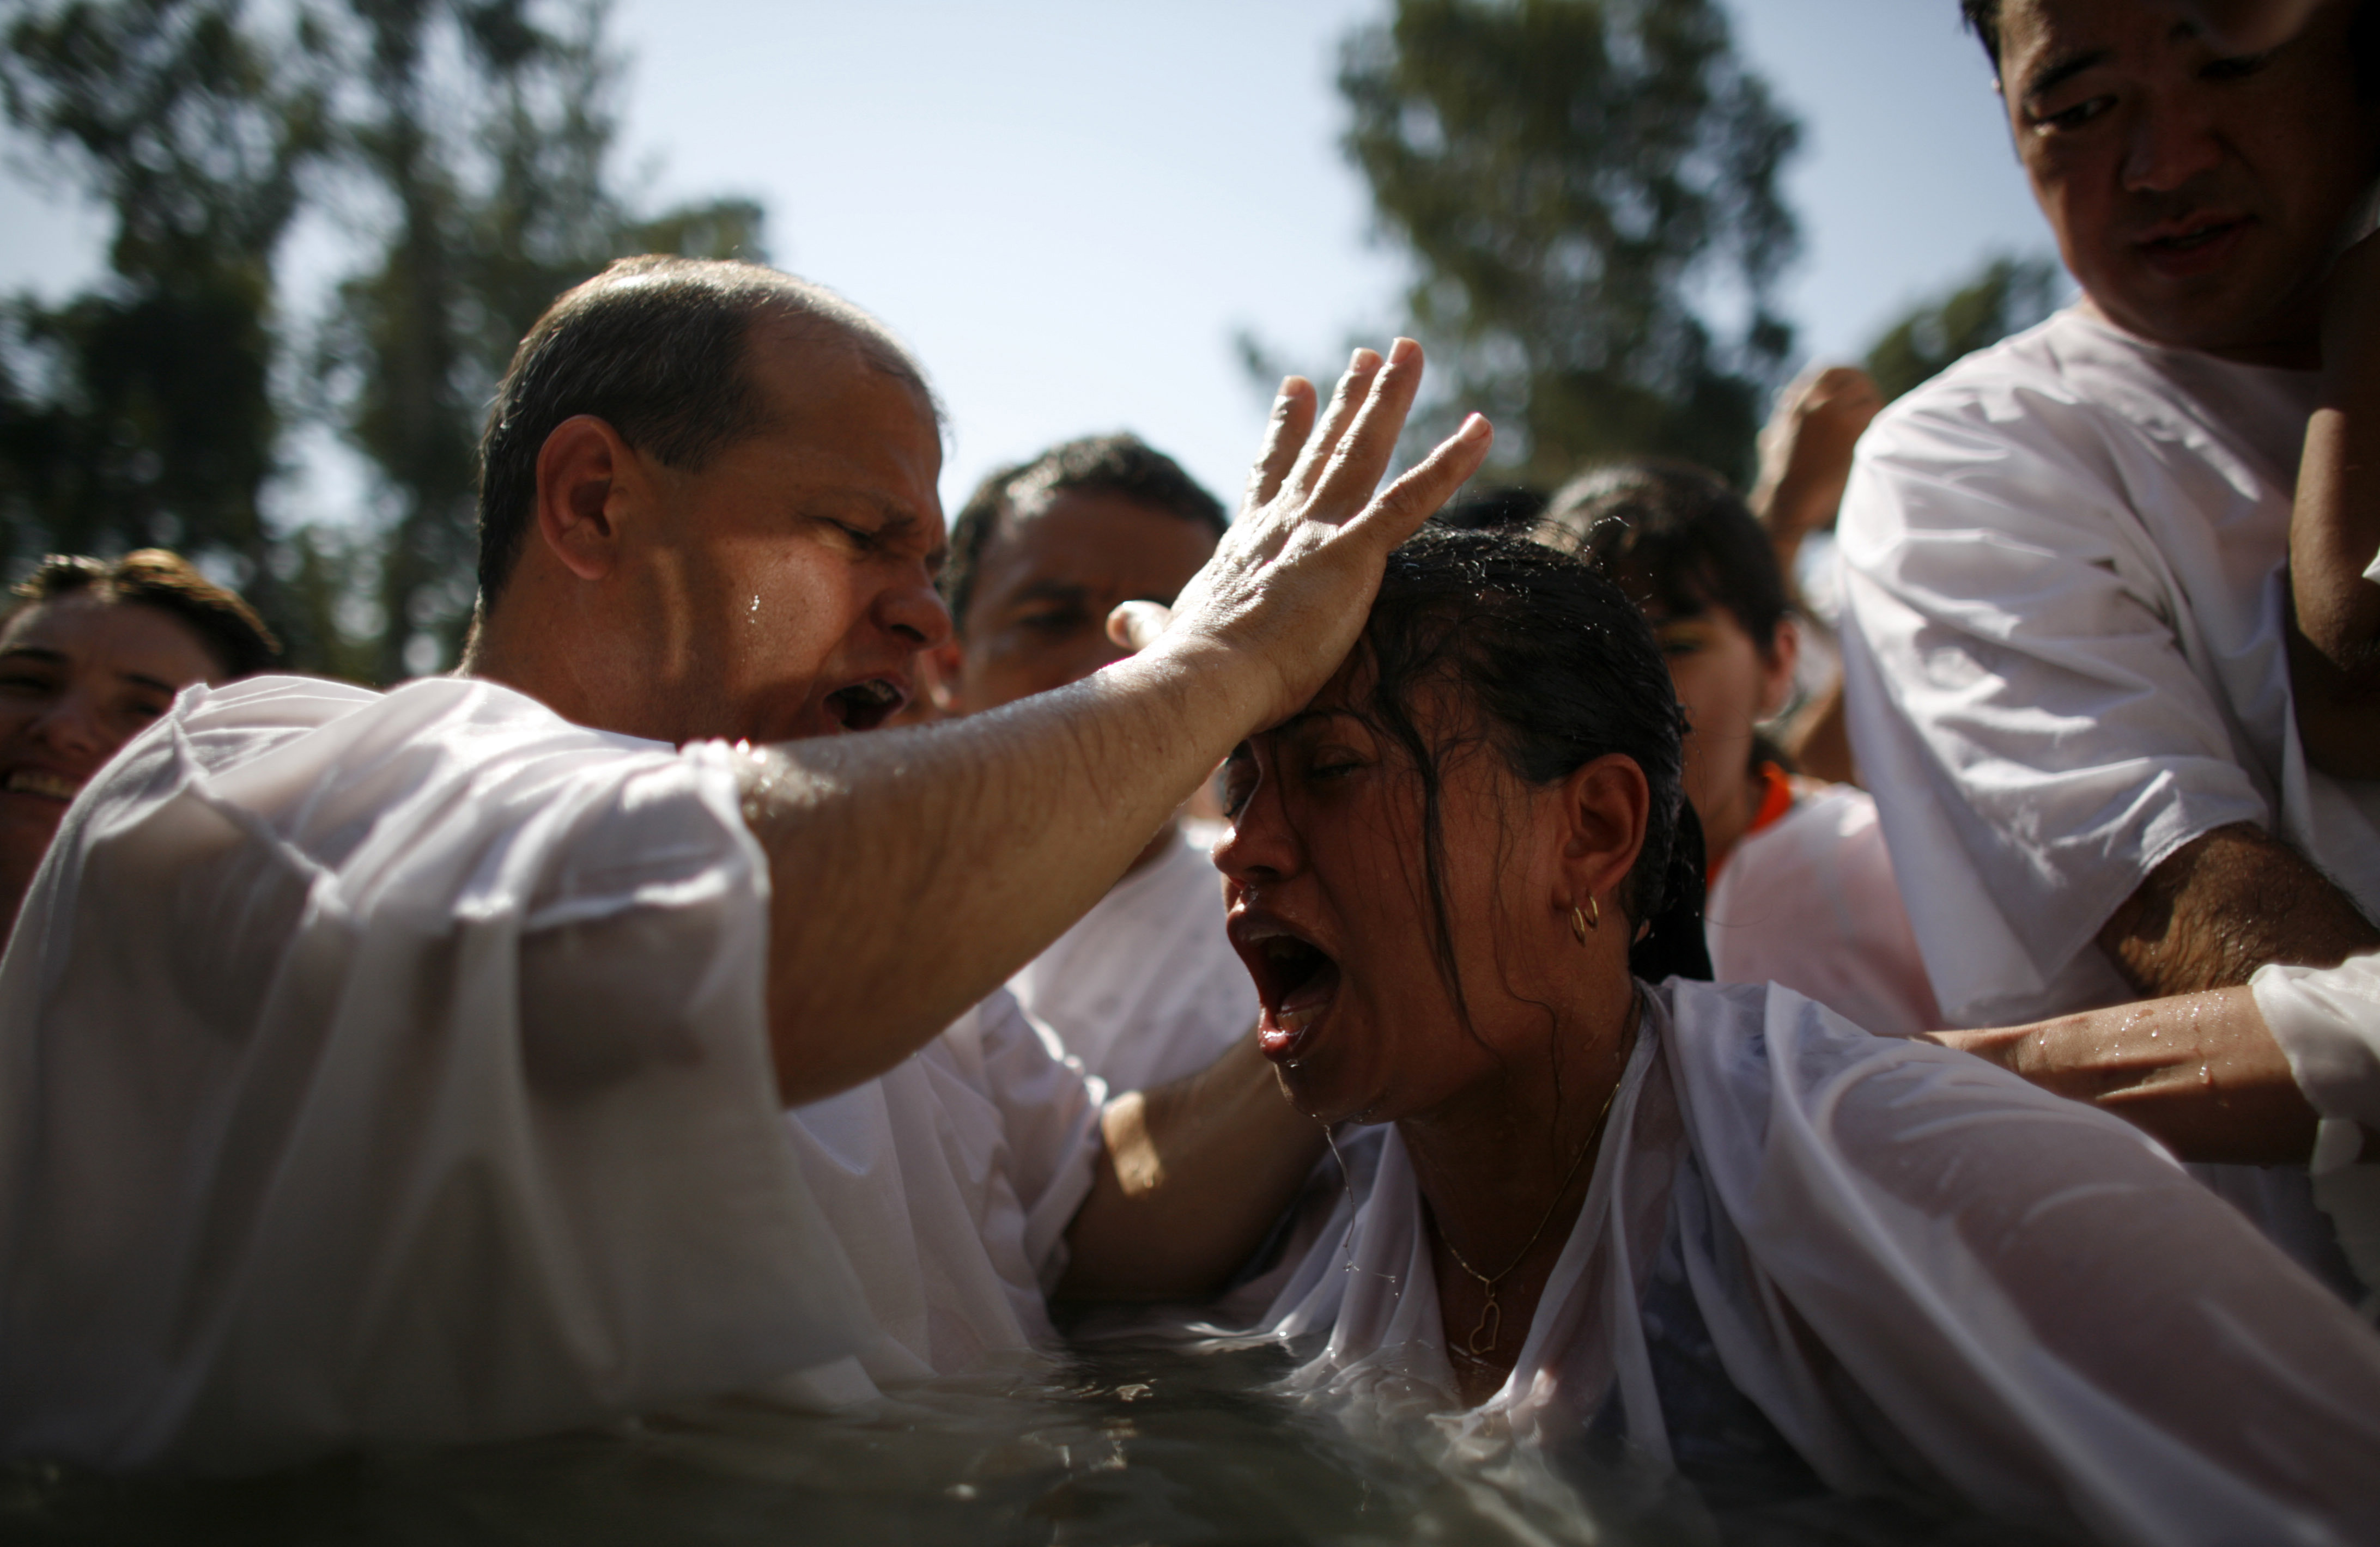 A group of evangelical Christian pilgrims take part in a baptism ceremony in the Jordan River near the northern city of Tiberias (Reuters)